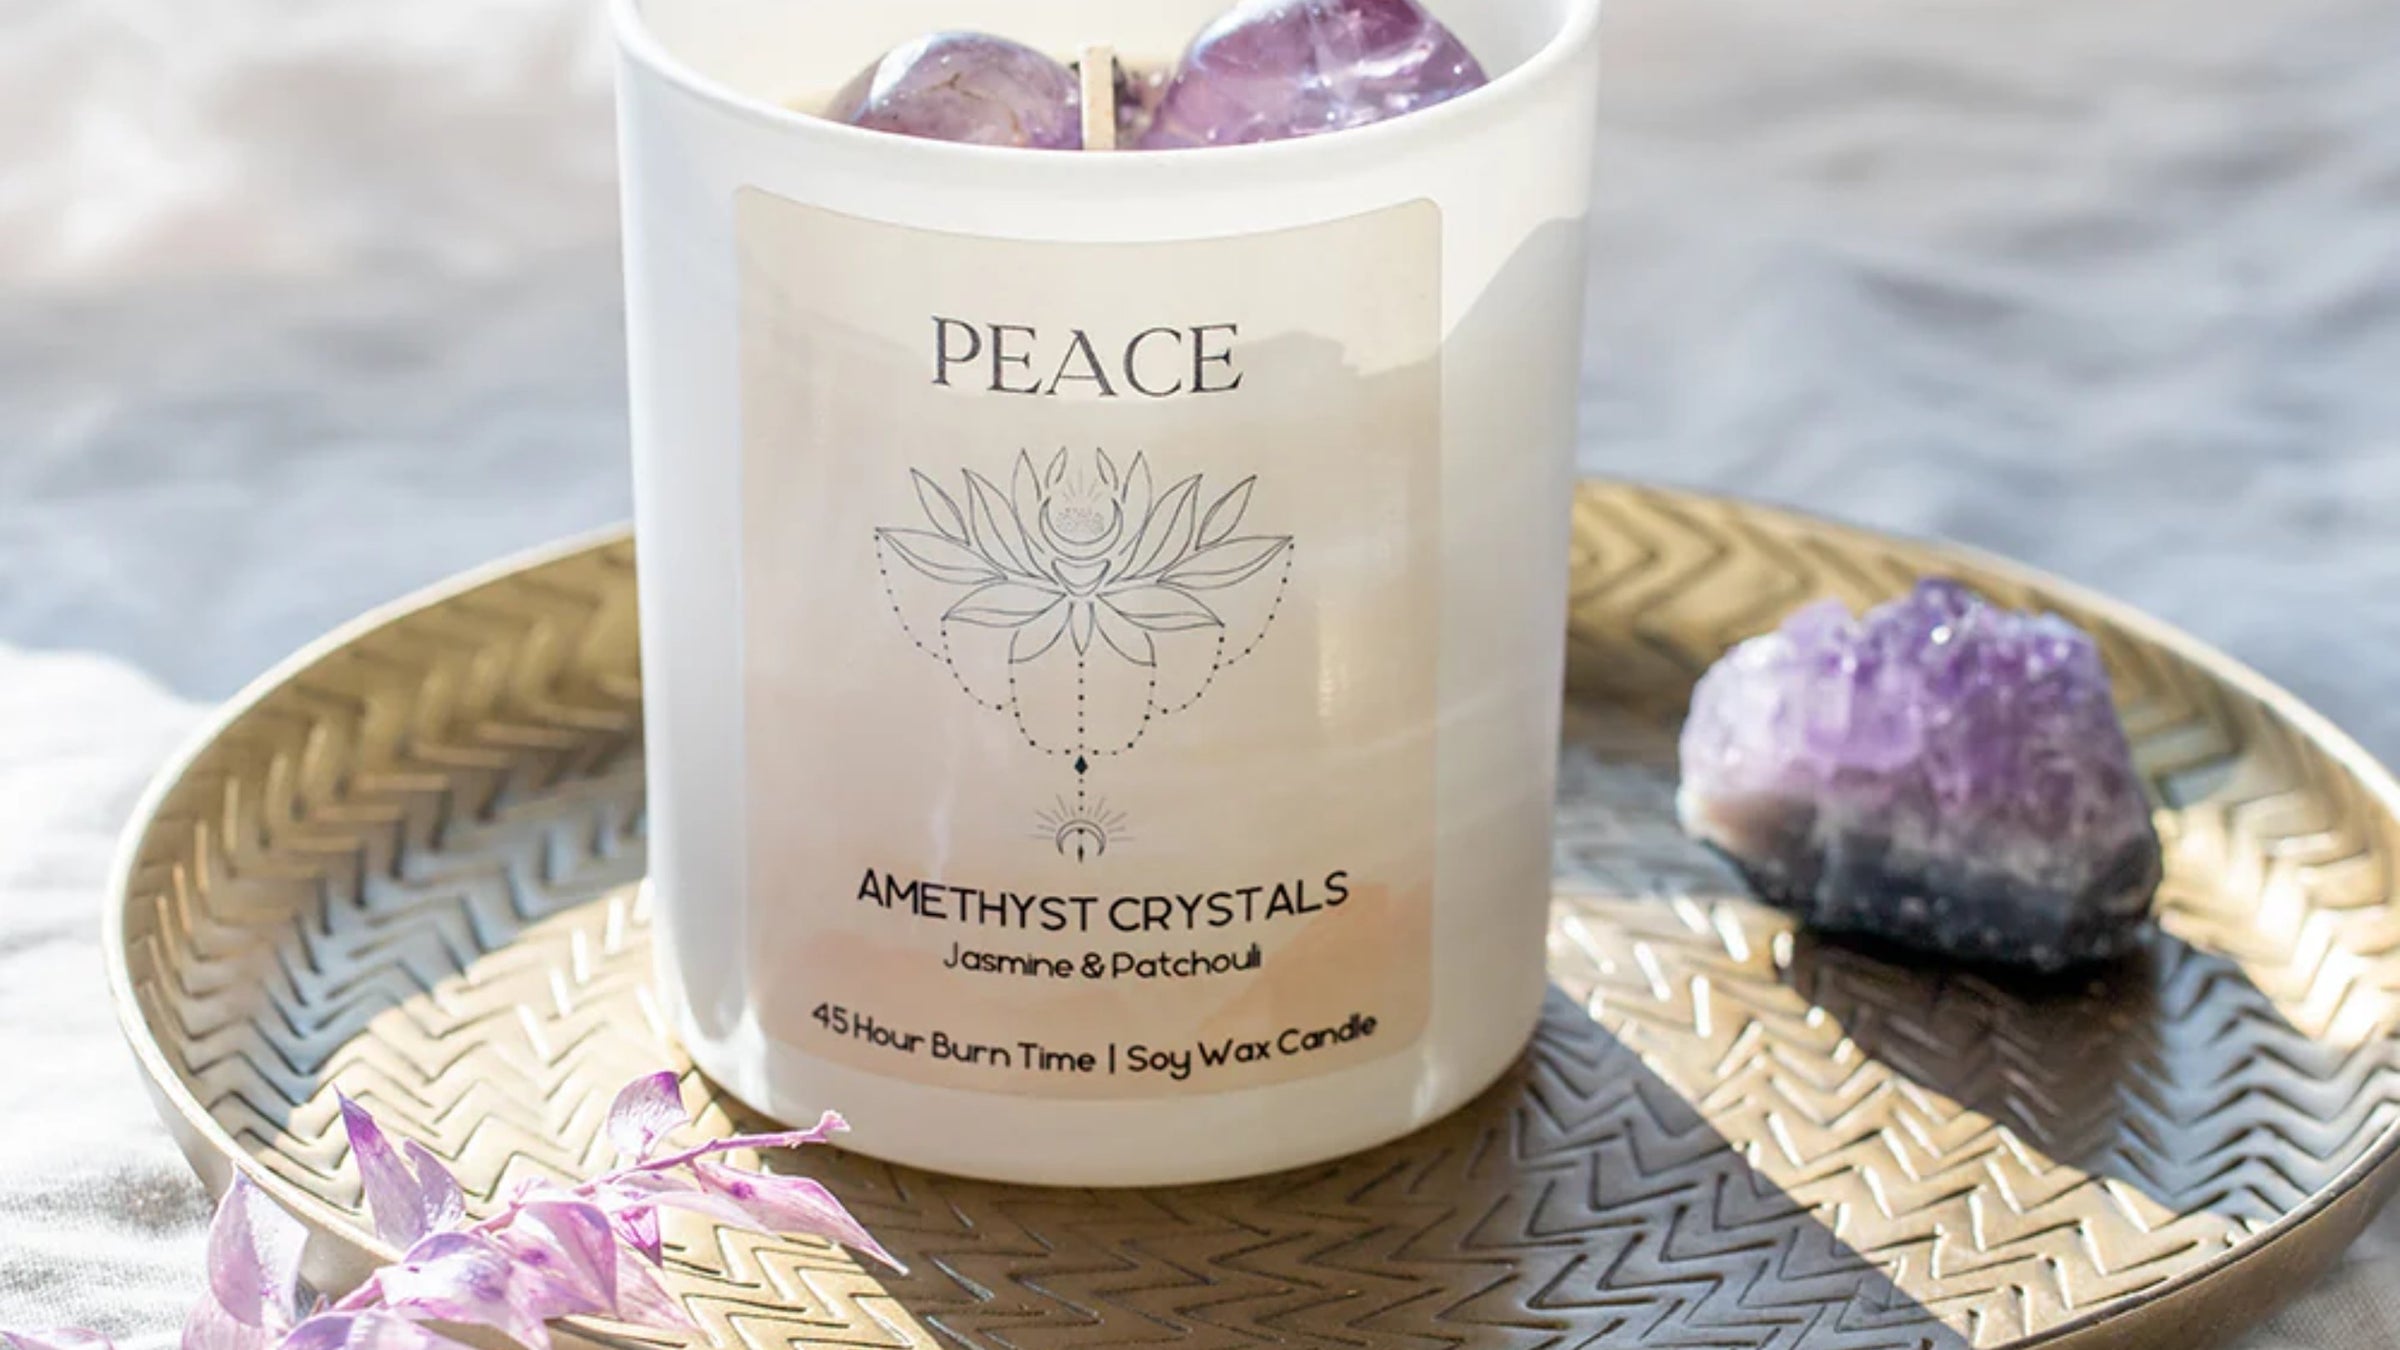 Crystal energy candles infused with intention crystals including moonstone and amethyst